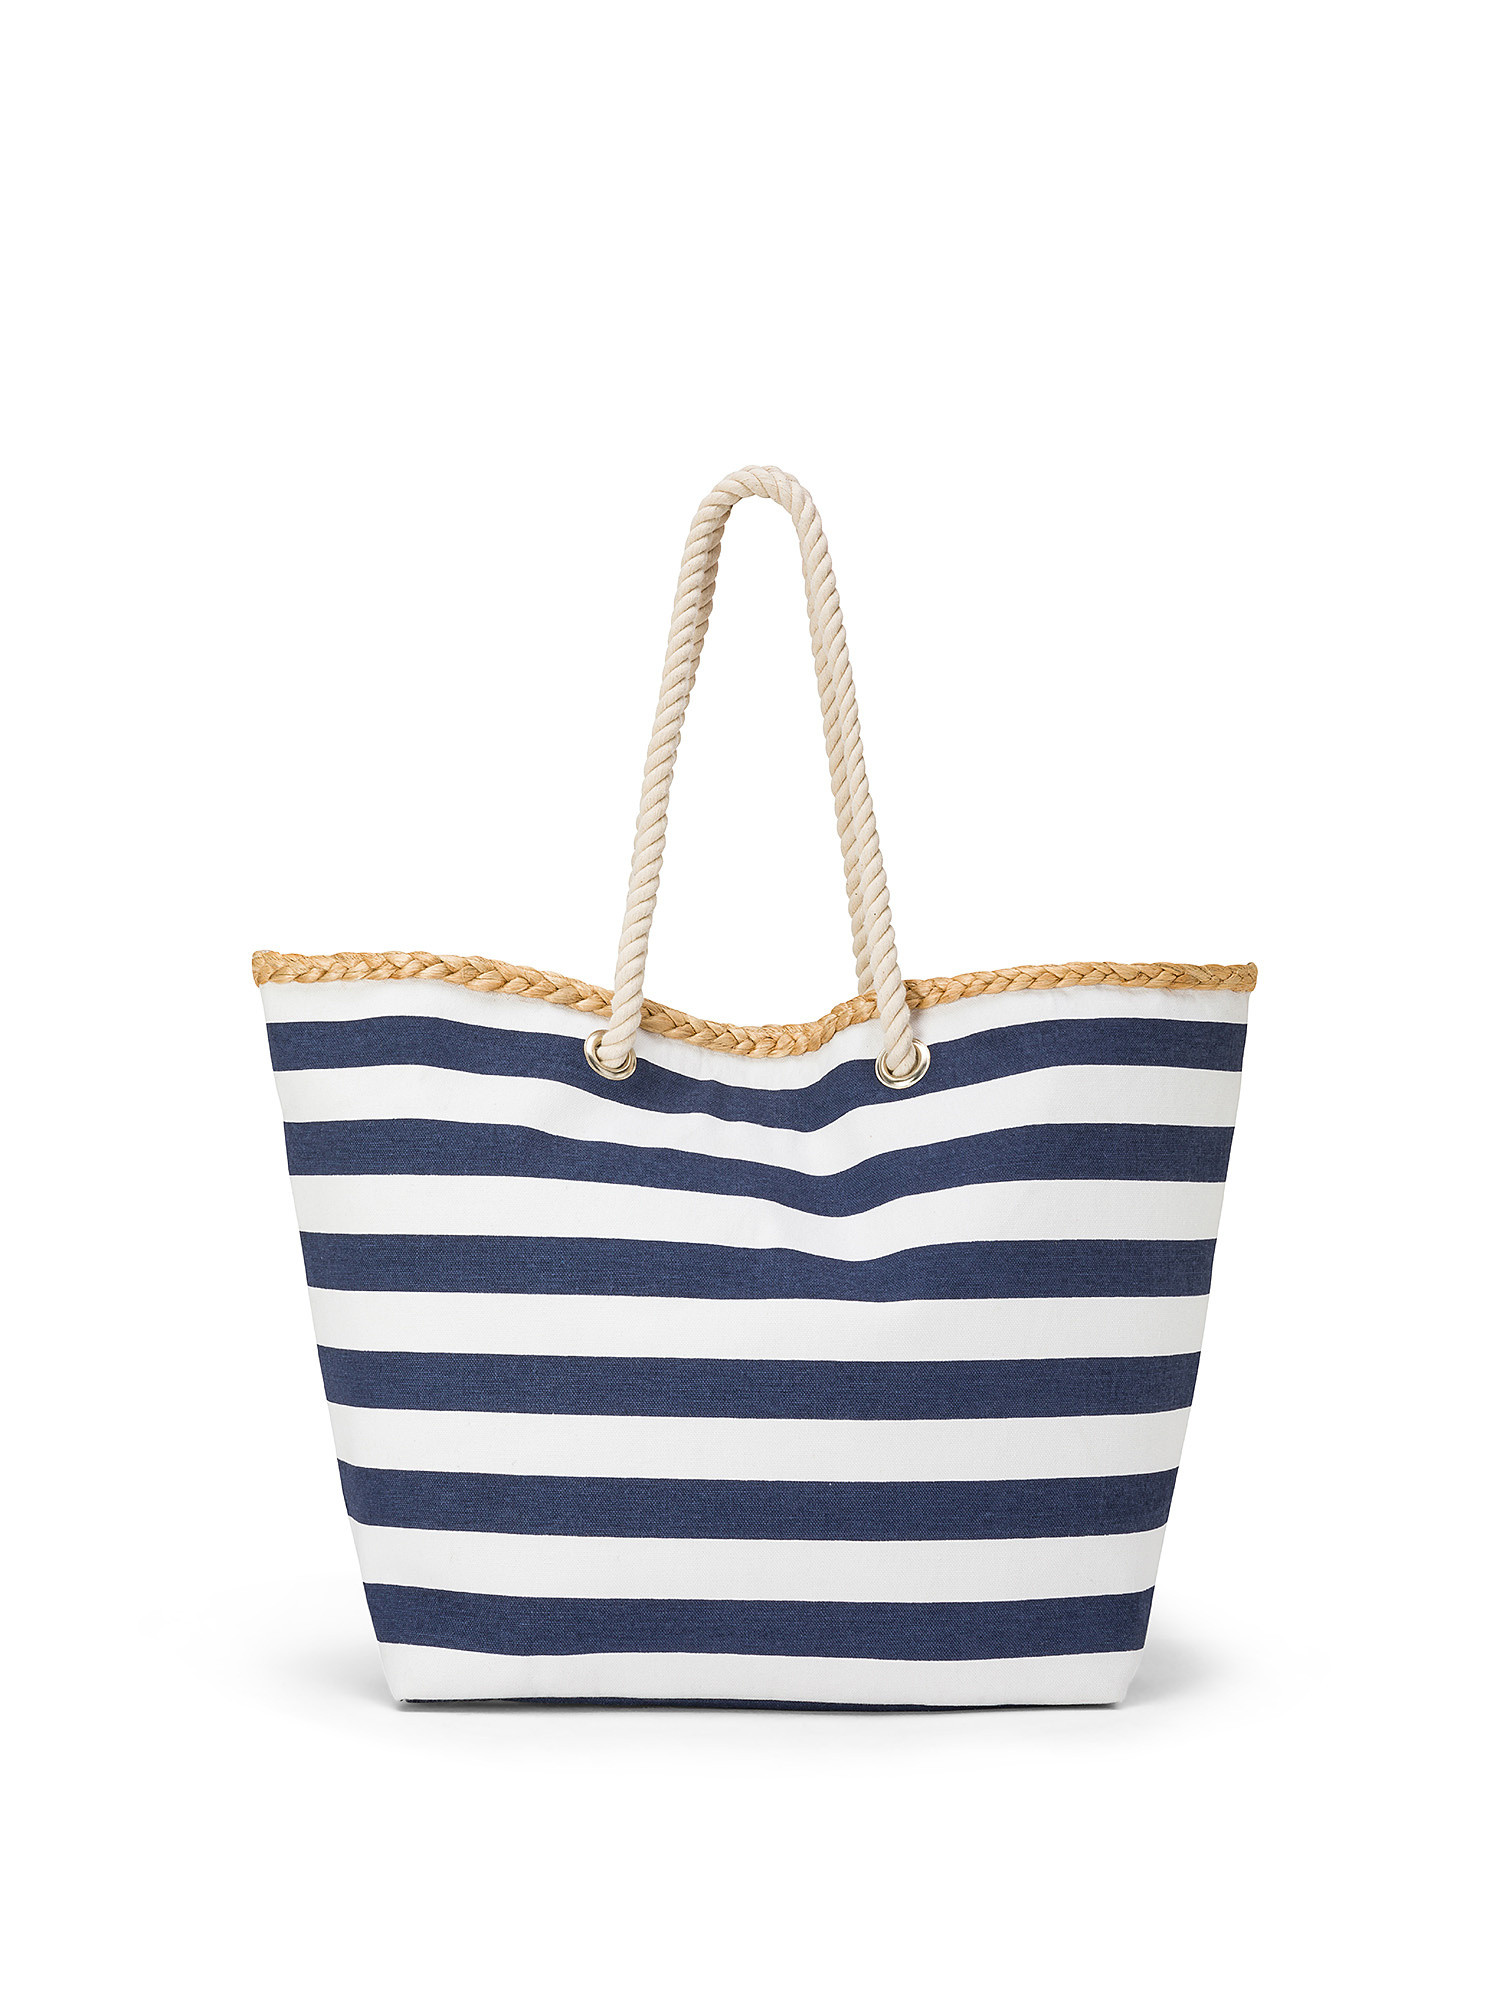 Shopping bag a righe marinare, Blu, large image number 0